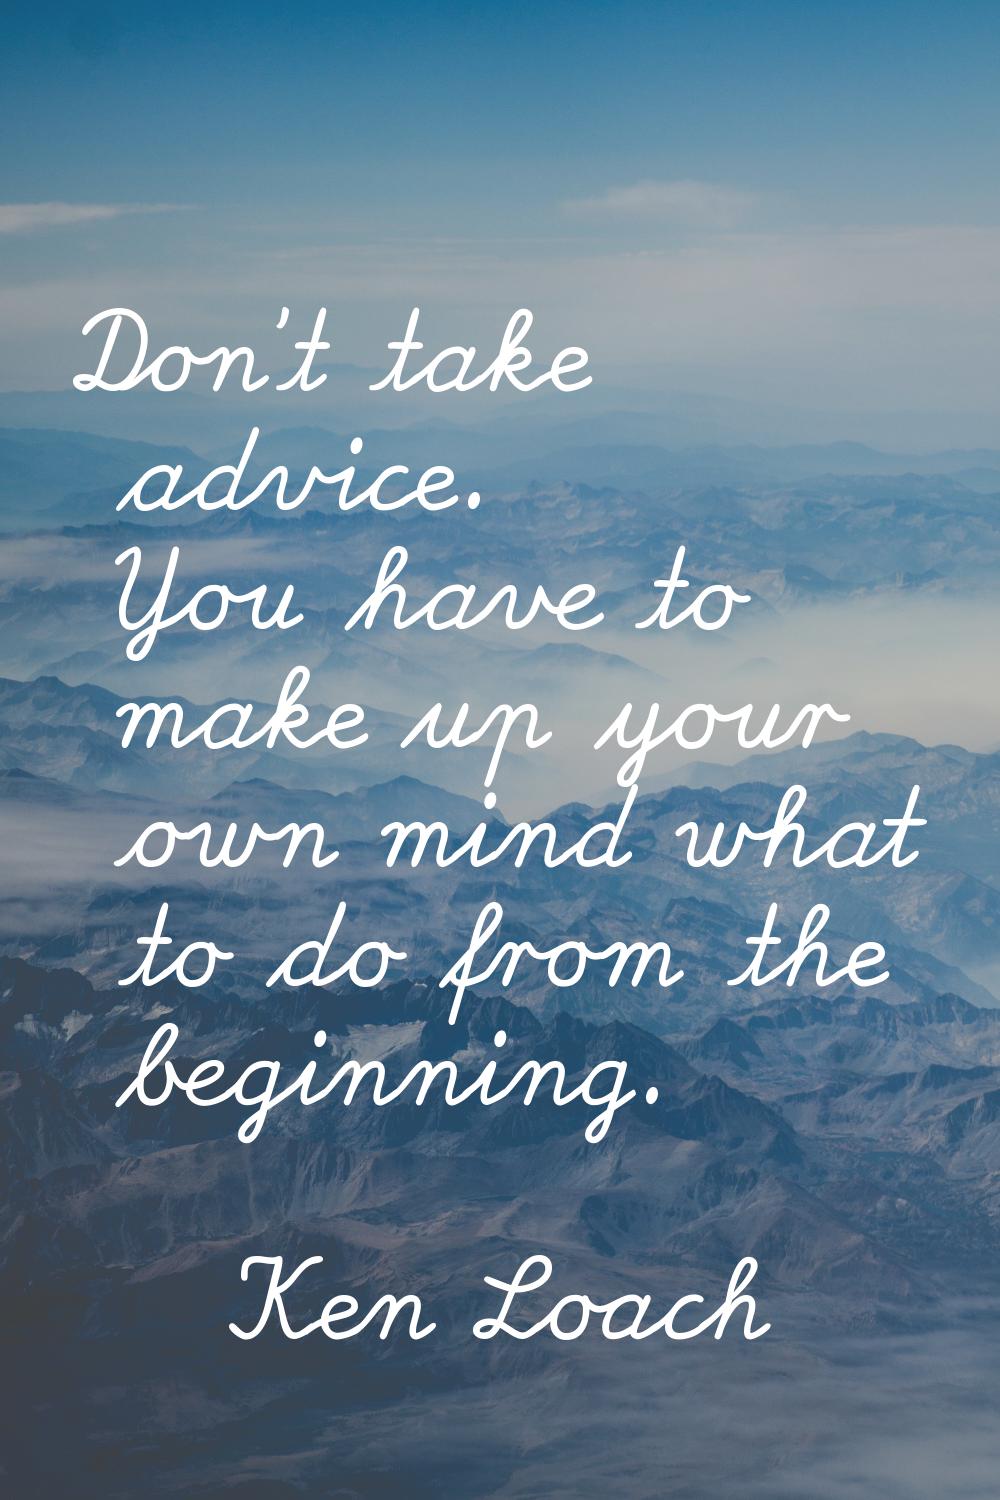 Don't take advice. You have to make up your own mind what to do from the beginning.